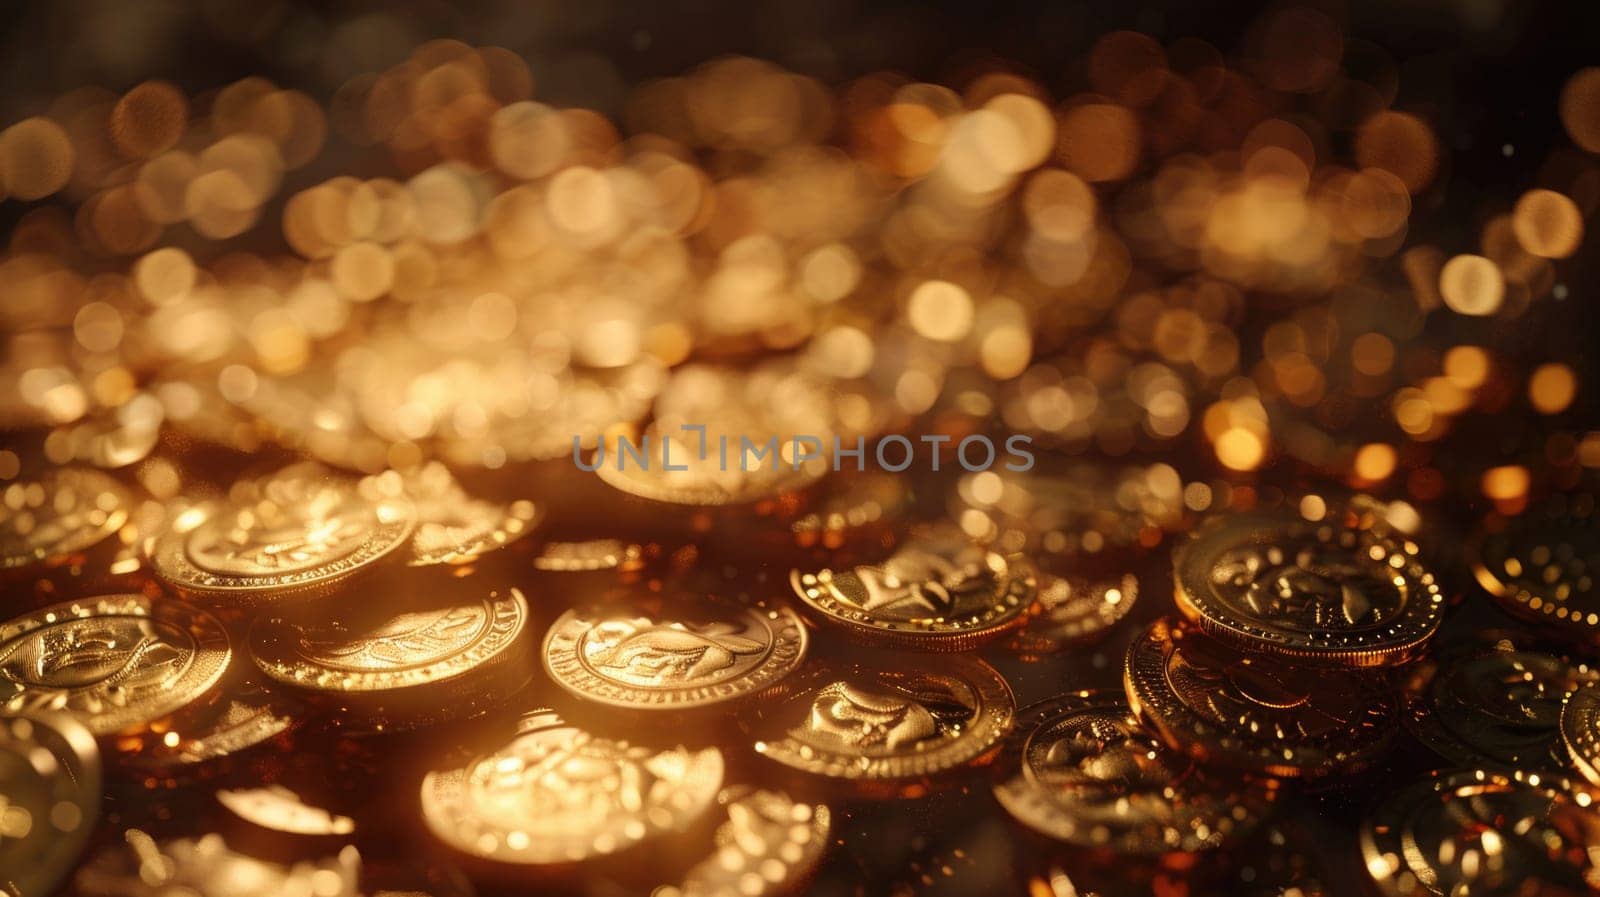 A stack of shiny gold coins stacked neatly on top of a table, creating an image of wealth and opulence.